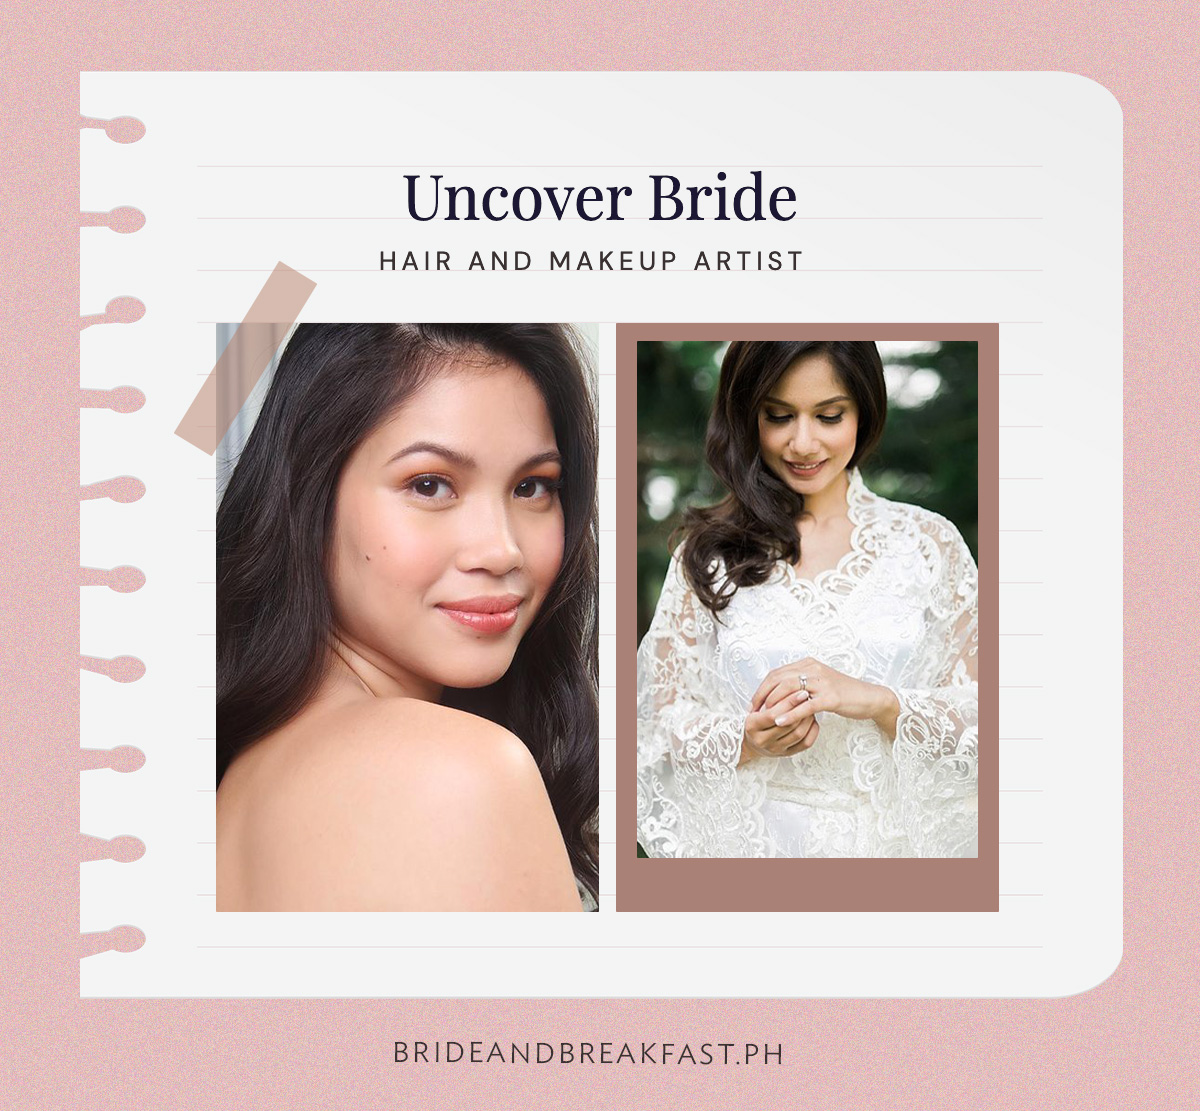 Uncover Bride Hair and Makeup Artist